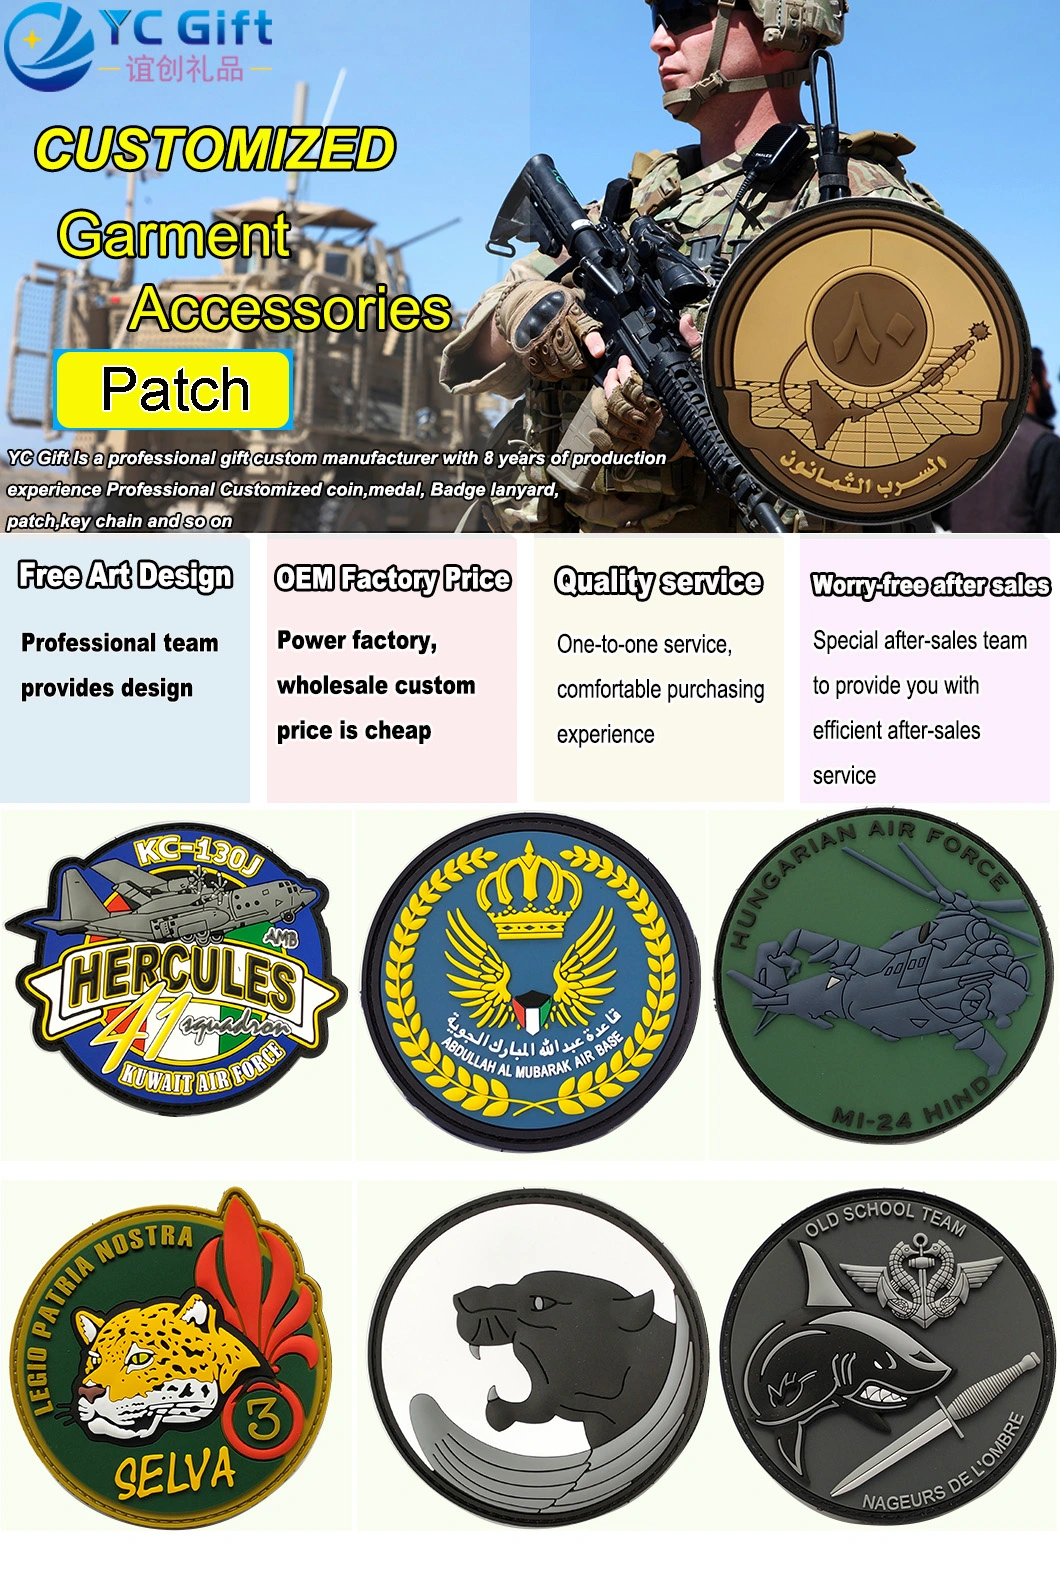 Wholesale Custom Military Tactical Gear Police Badge PU Label PVC Logo Uniform Lapel Pin Clothing Sticker Label Patch Printing in China (PT18-B)